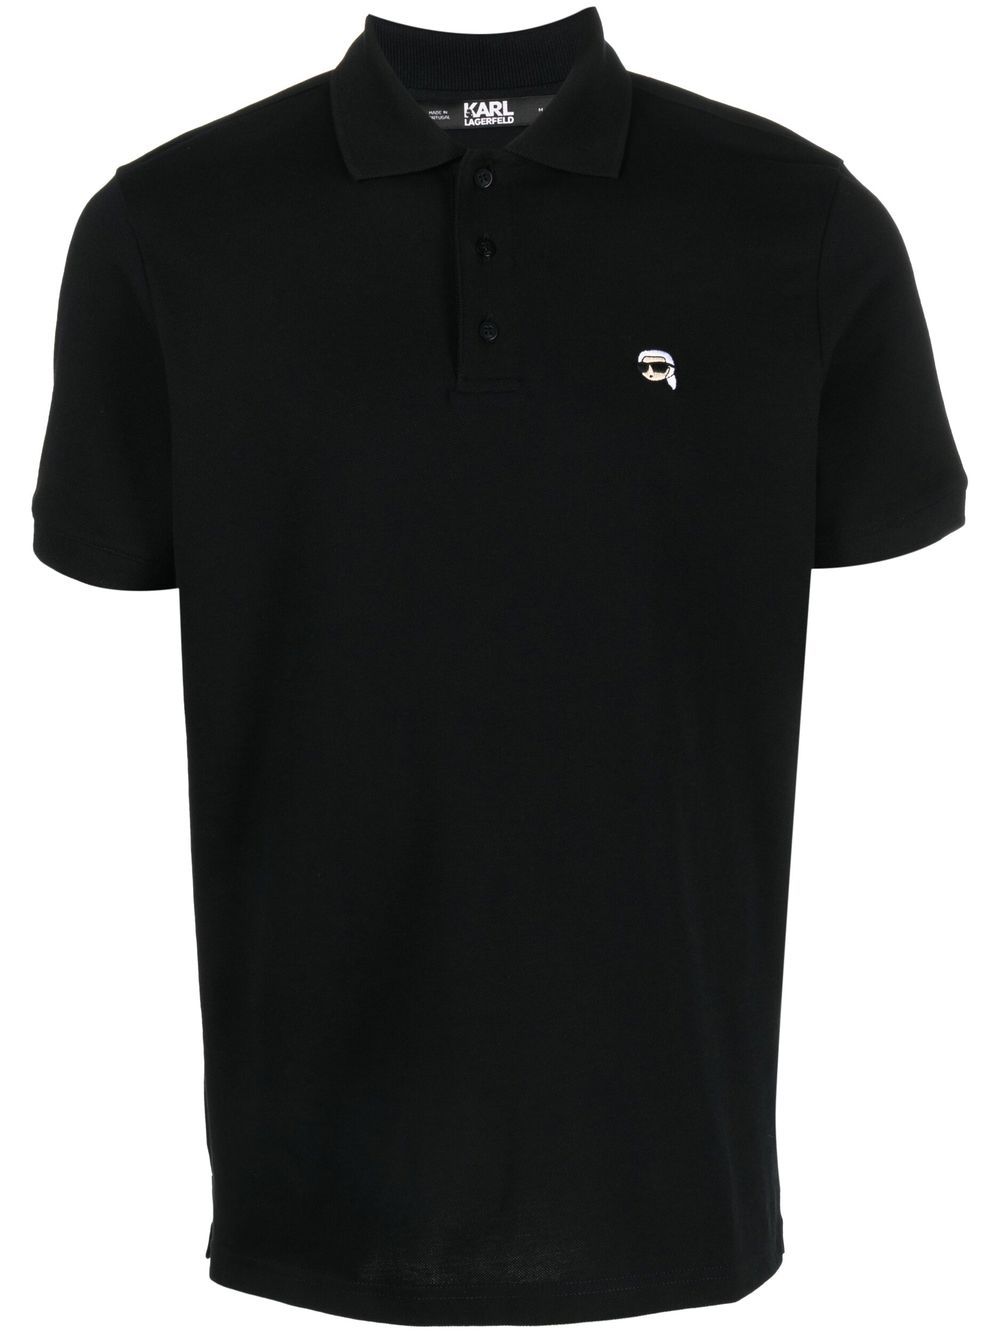 Karl Lagerfeld Ikonik 2.0 Embroidered Polo Shirt In Black